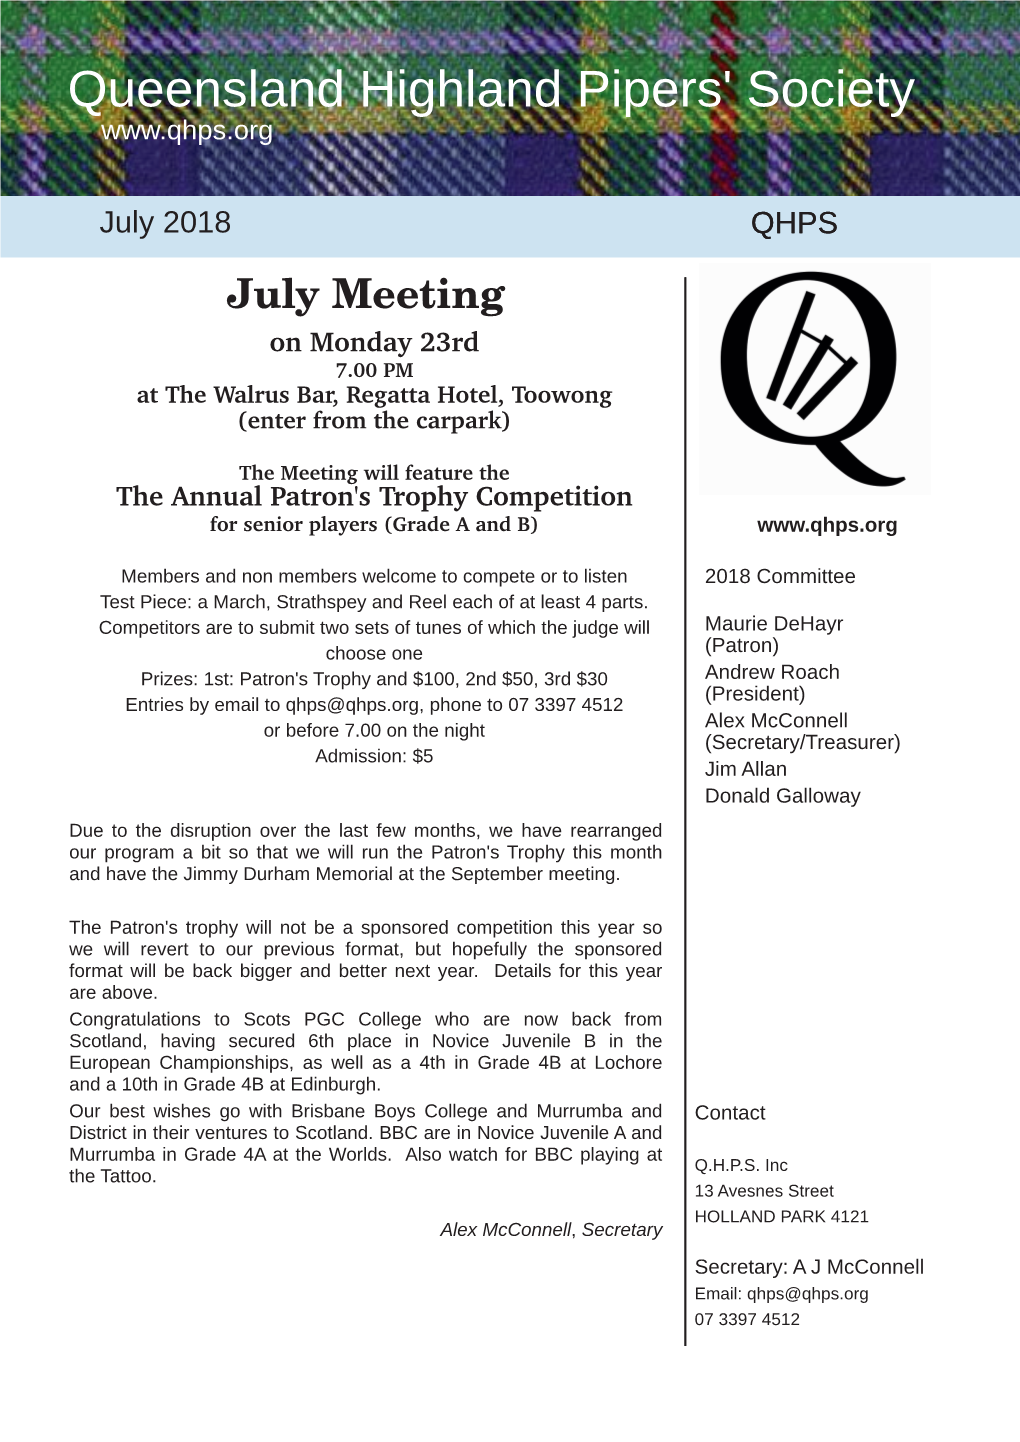 July Meeting on Monday 23Rd 7.00 PM at the Walrus Bar, Regatta Hotel, Toowong (Enter from the Carpark)